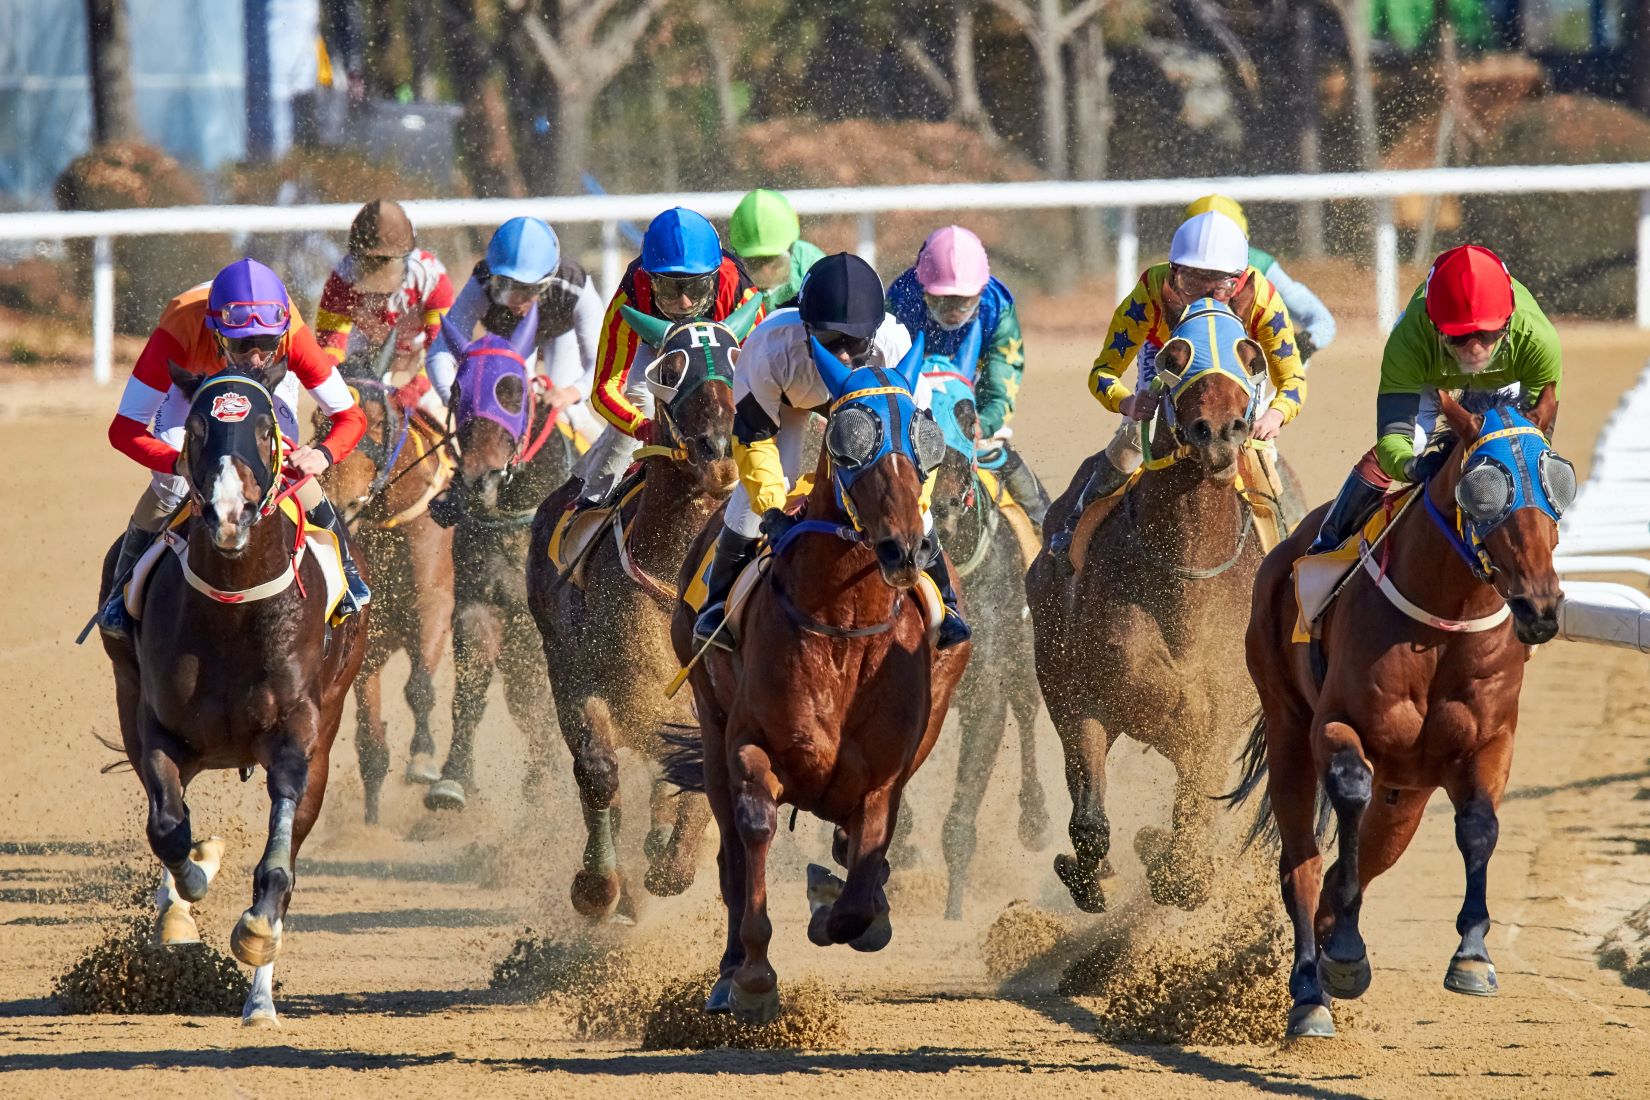 An image of horses racing in a horse race.